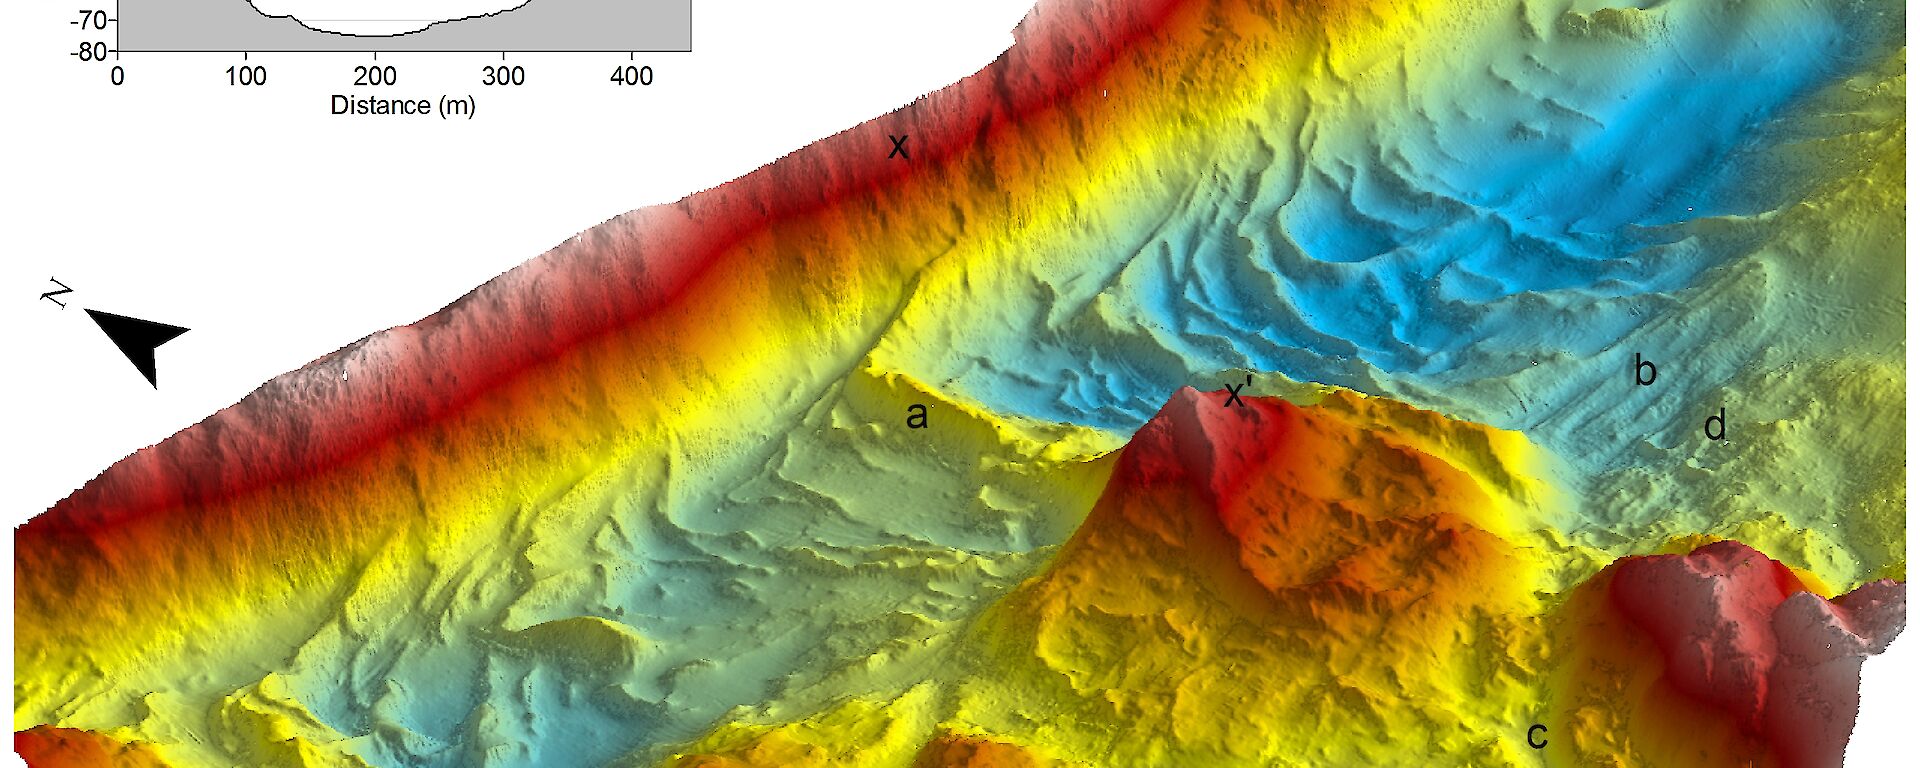 A map of the seafloor of Newcomb Bay (near Casey research station) created using a multibeam echosounder. A U-shaped valley typical of a glacially-eroded channel is visible (blue), with a glacial moraine at ‘a’, which is about 25m high.